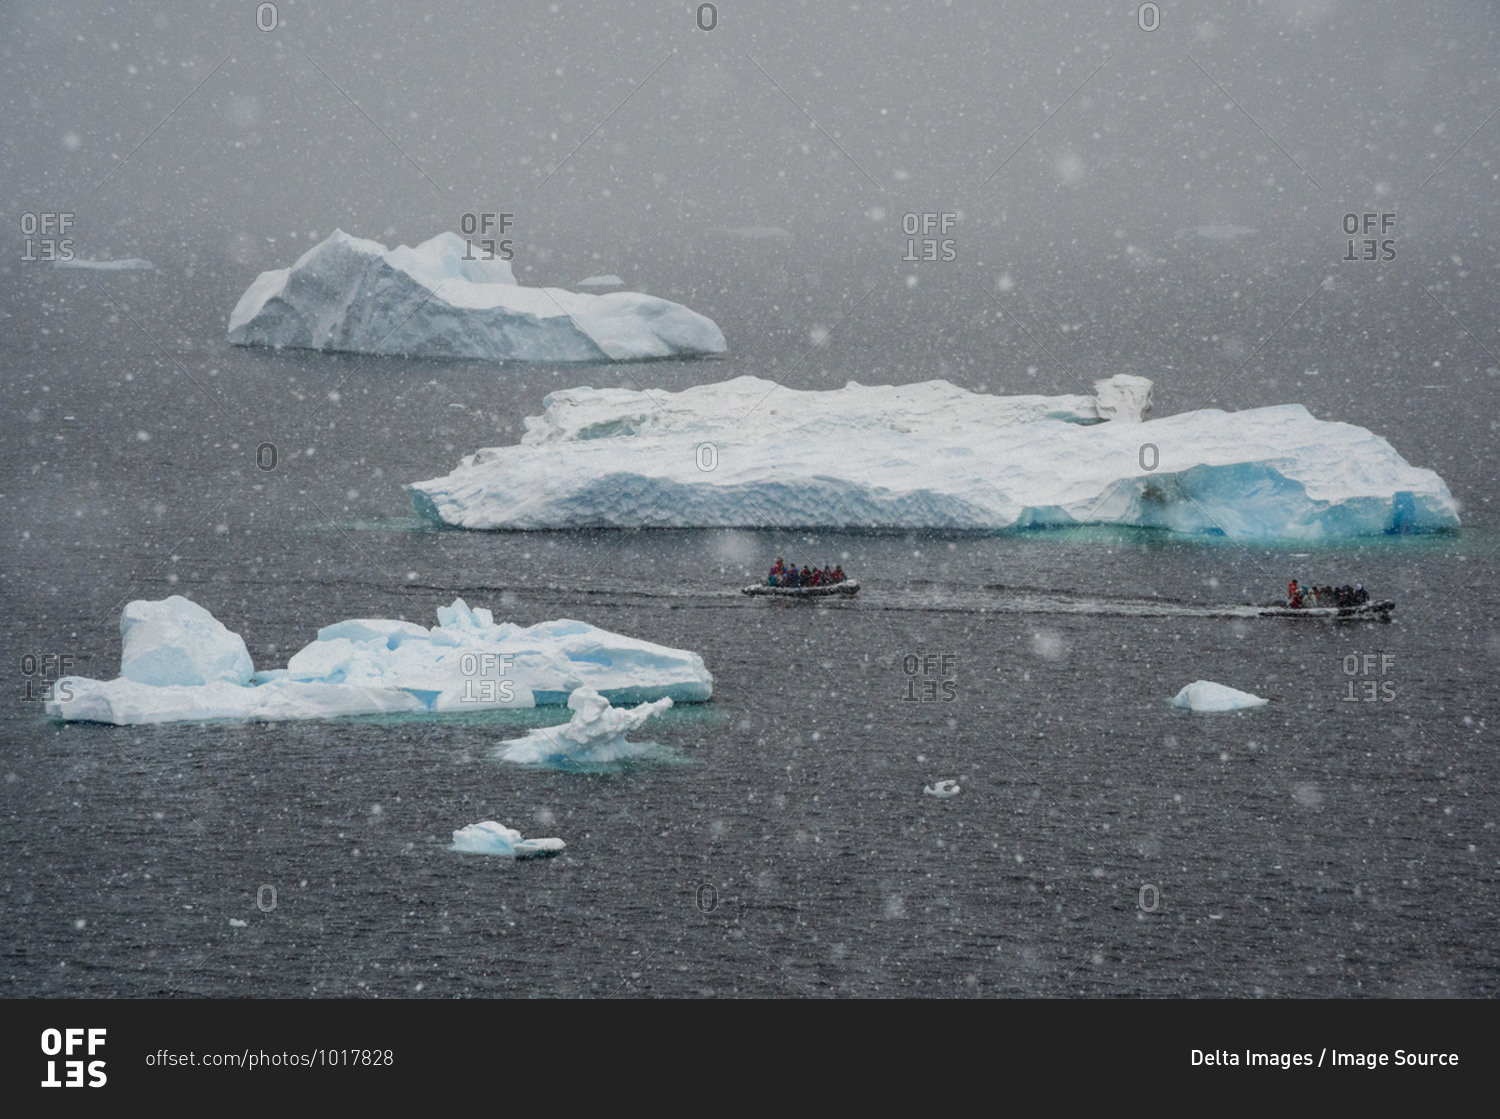 Tourists in inflatable boat sailing past icebergs in snowstorm, Portal Point, Antarctica